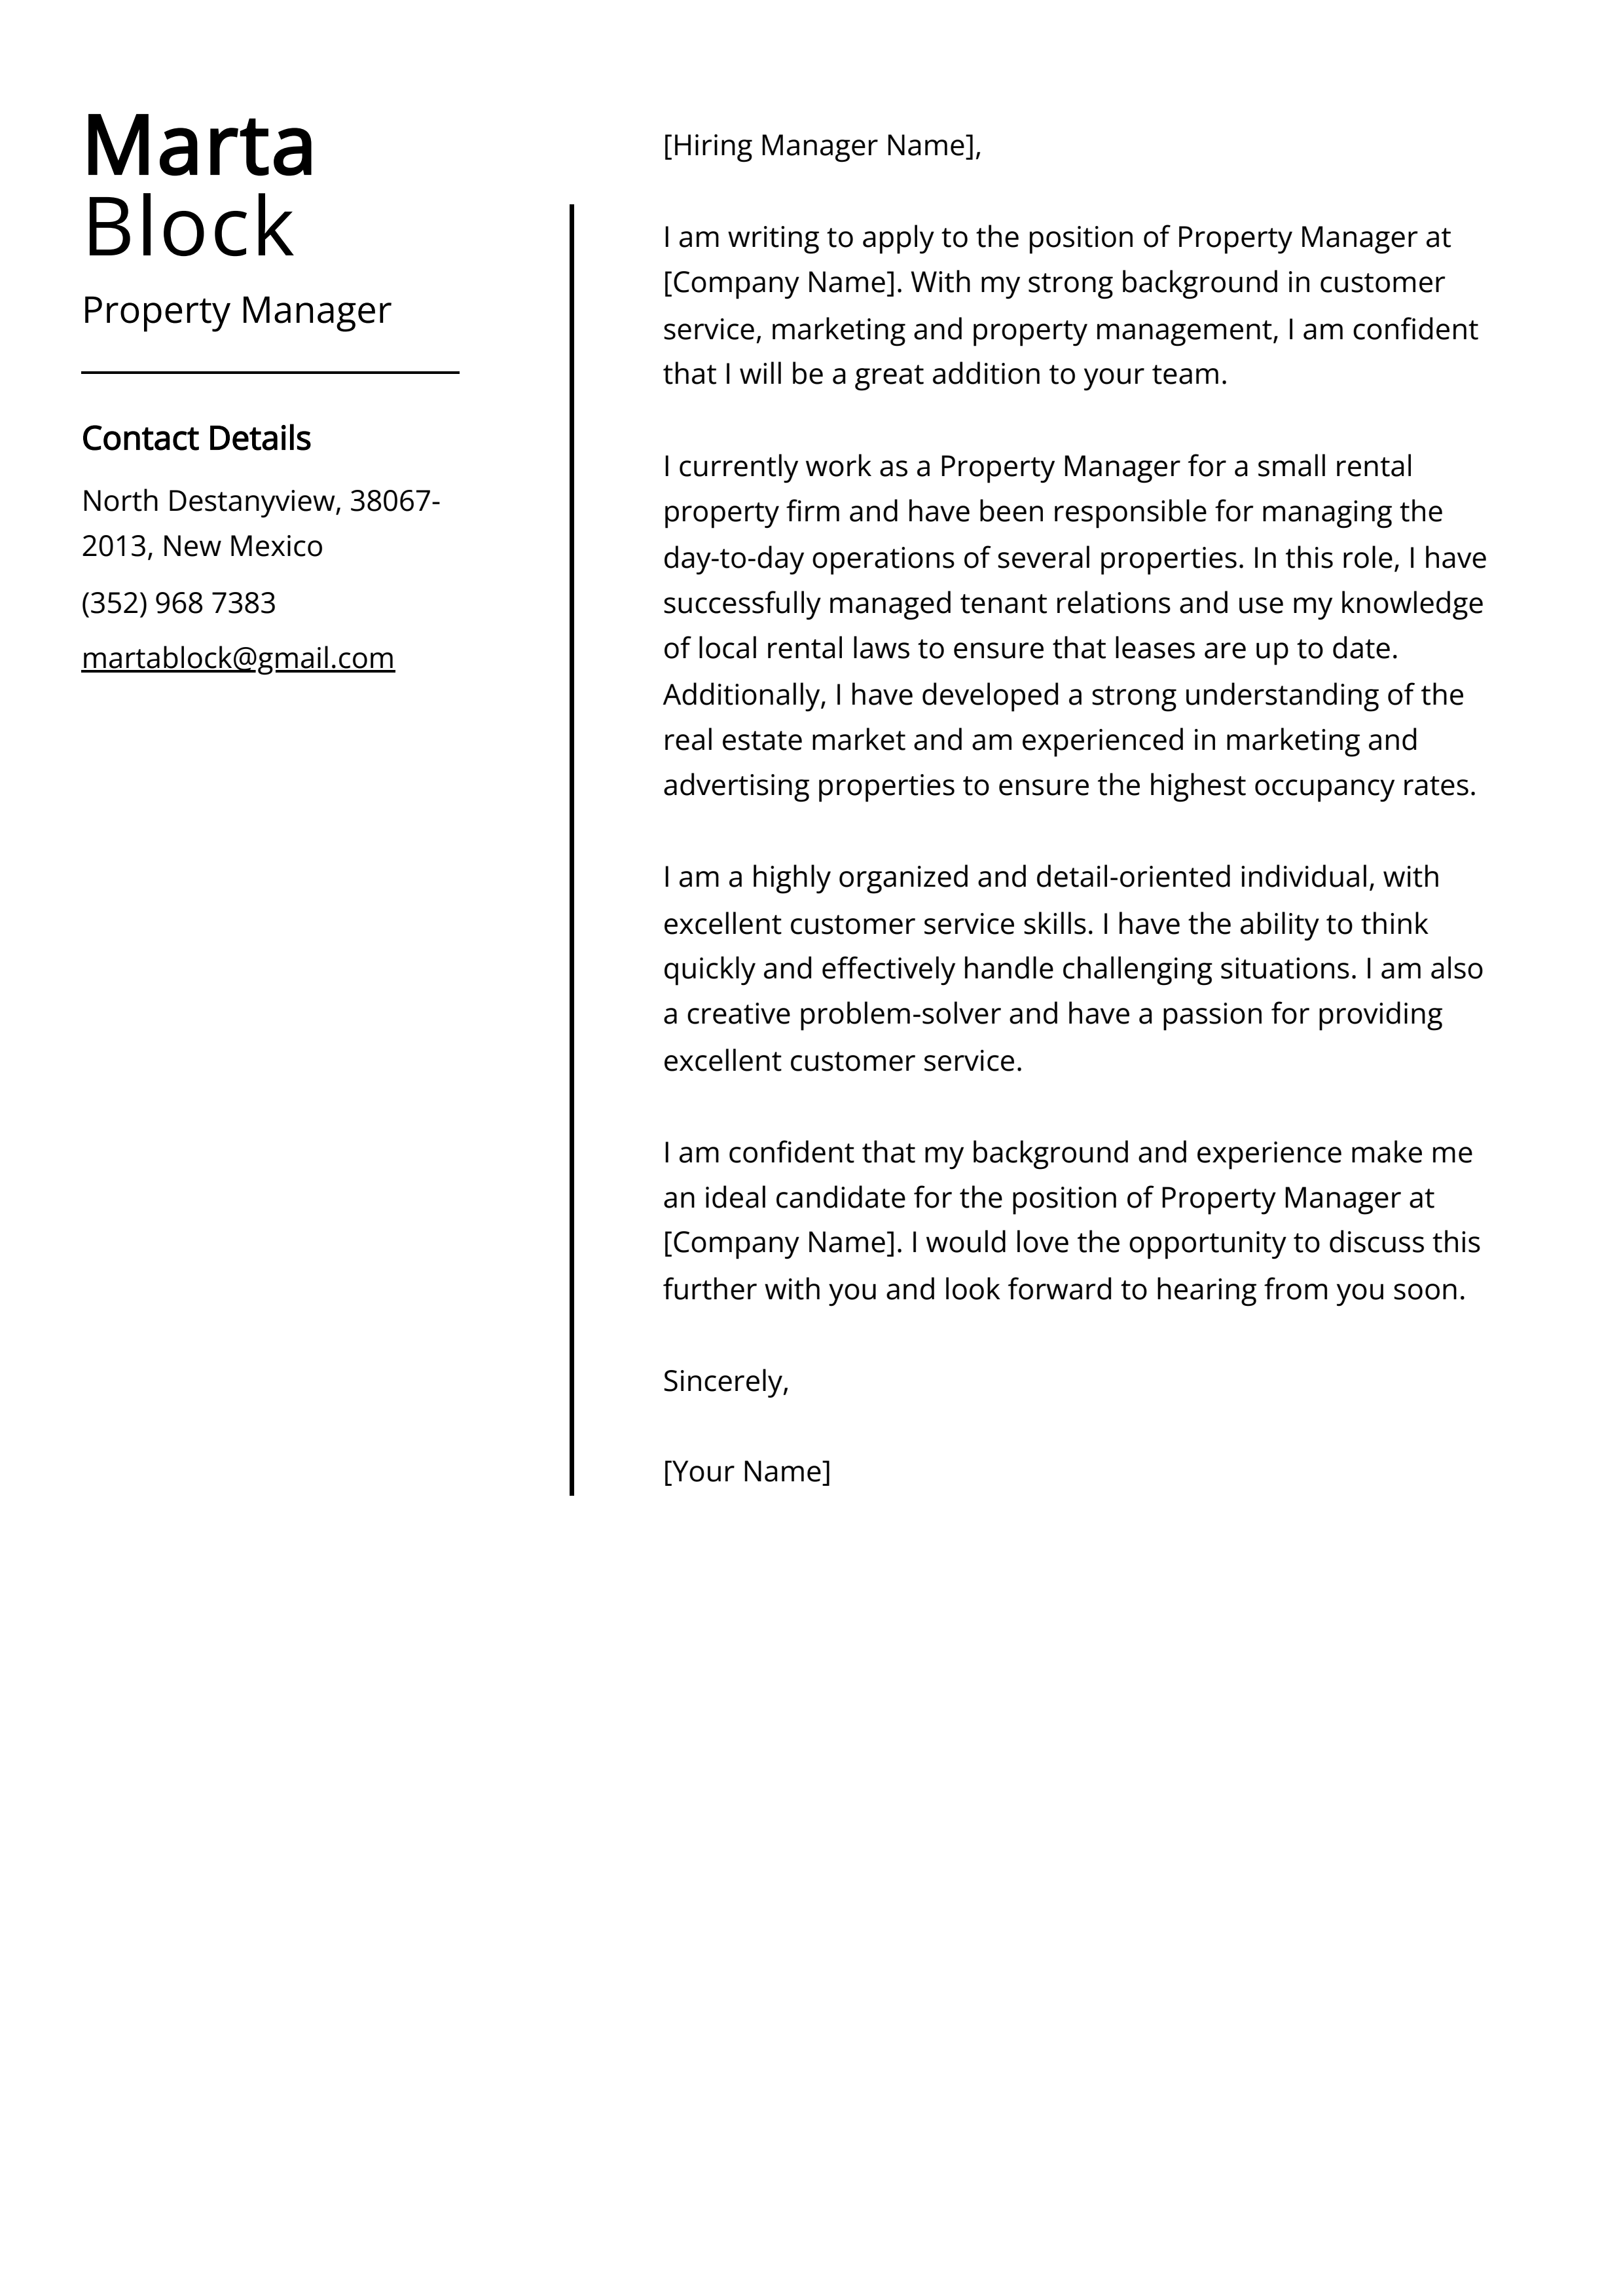 Property Manager Cover Letter Example